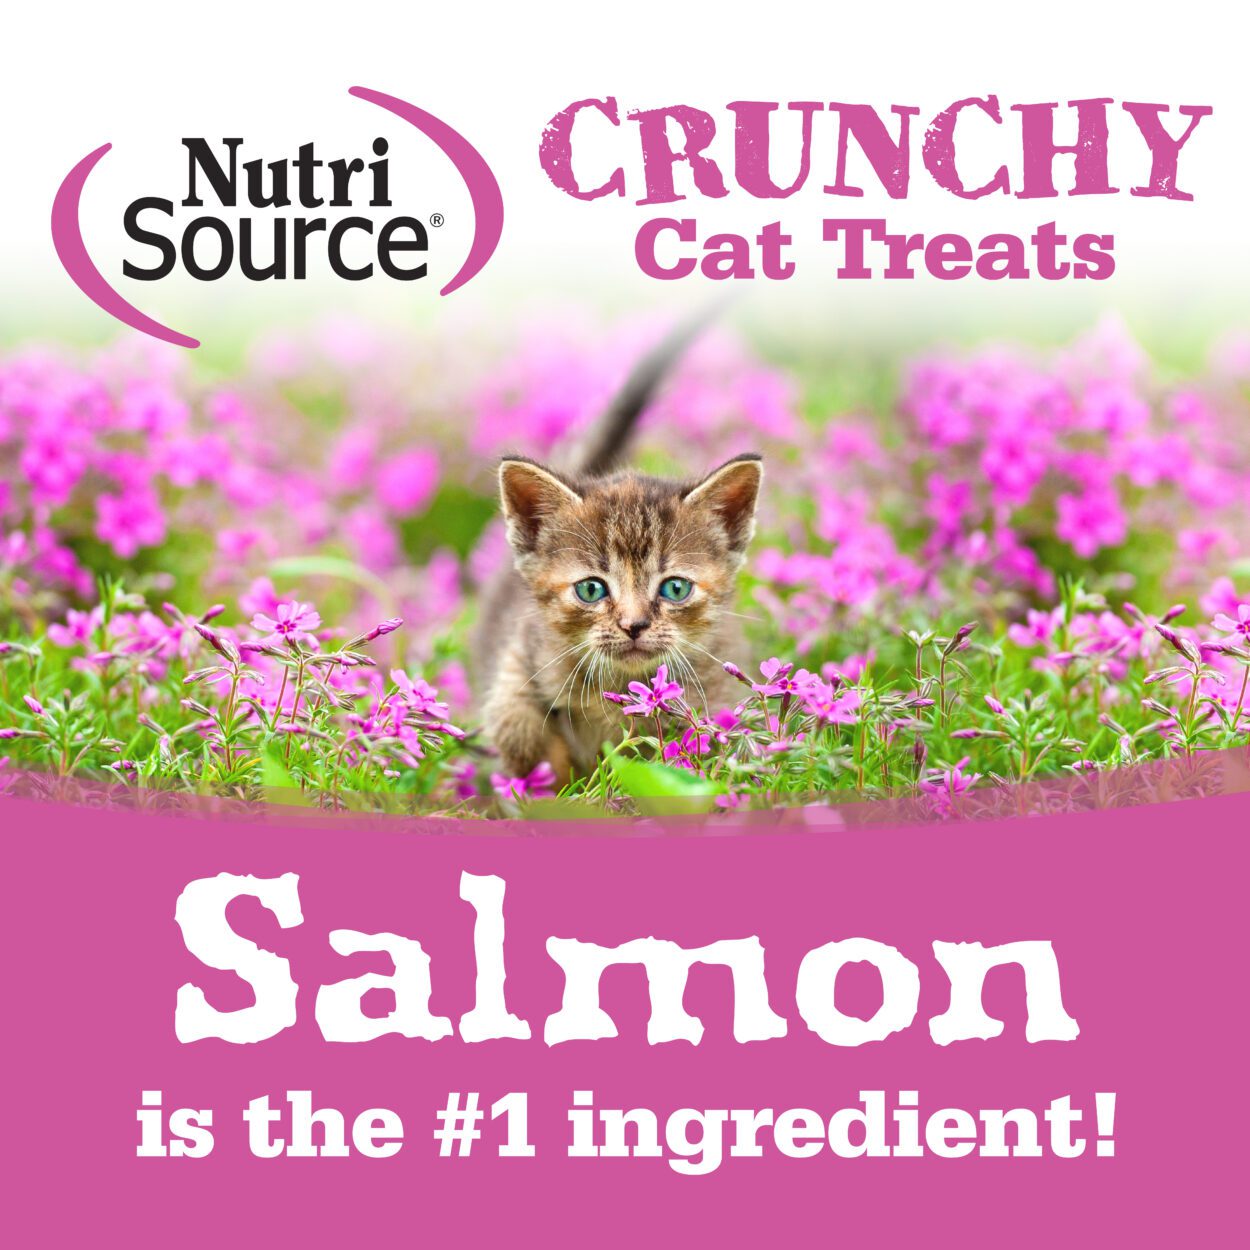 Salmon is the #1 ingredient!